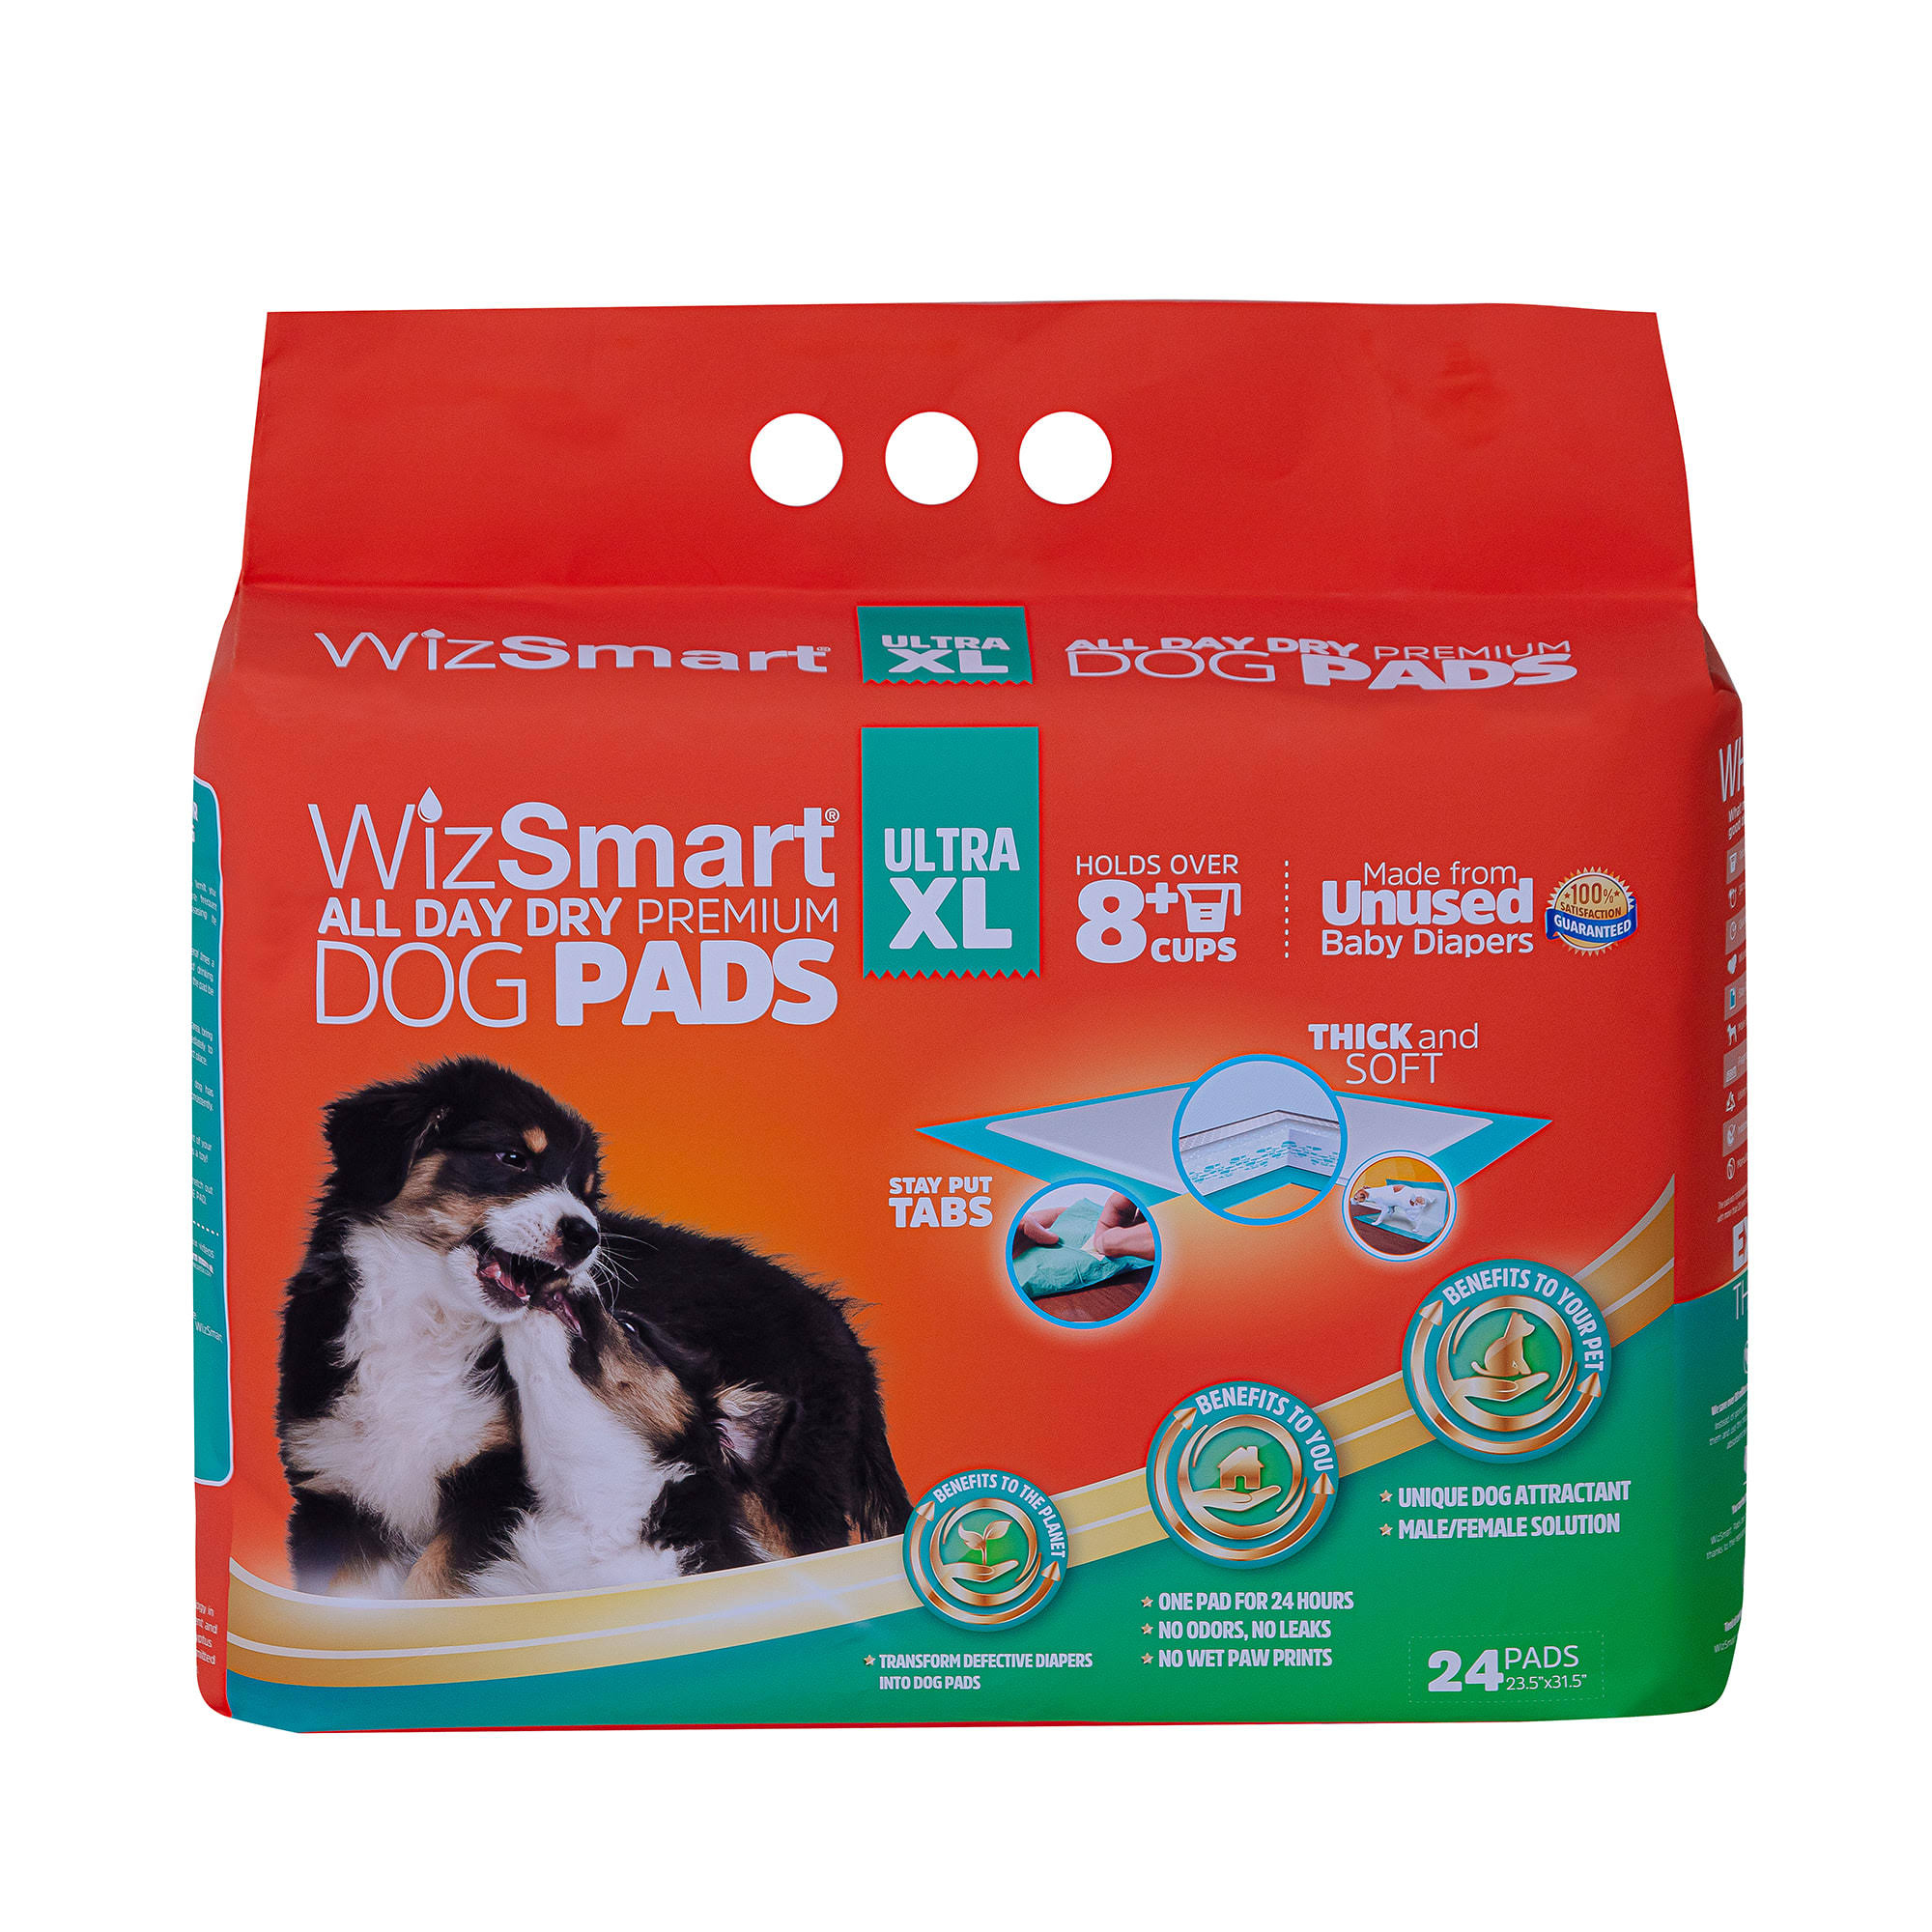 WizSmart Ultra XL All Day Dry Premium Dog Pads - 24 Count